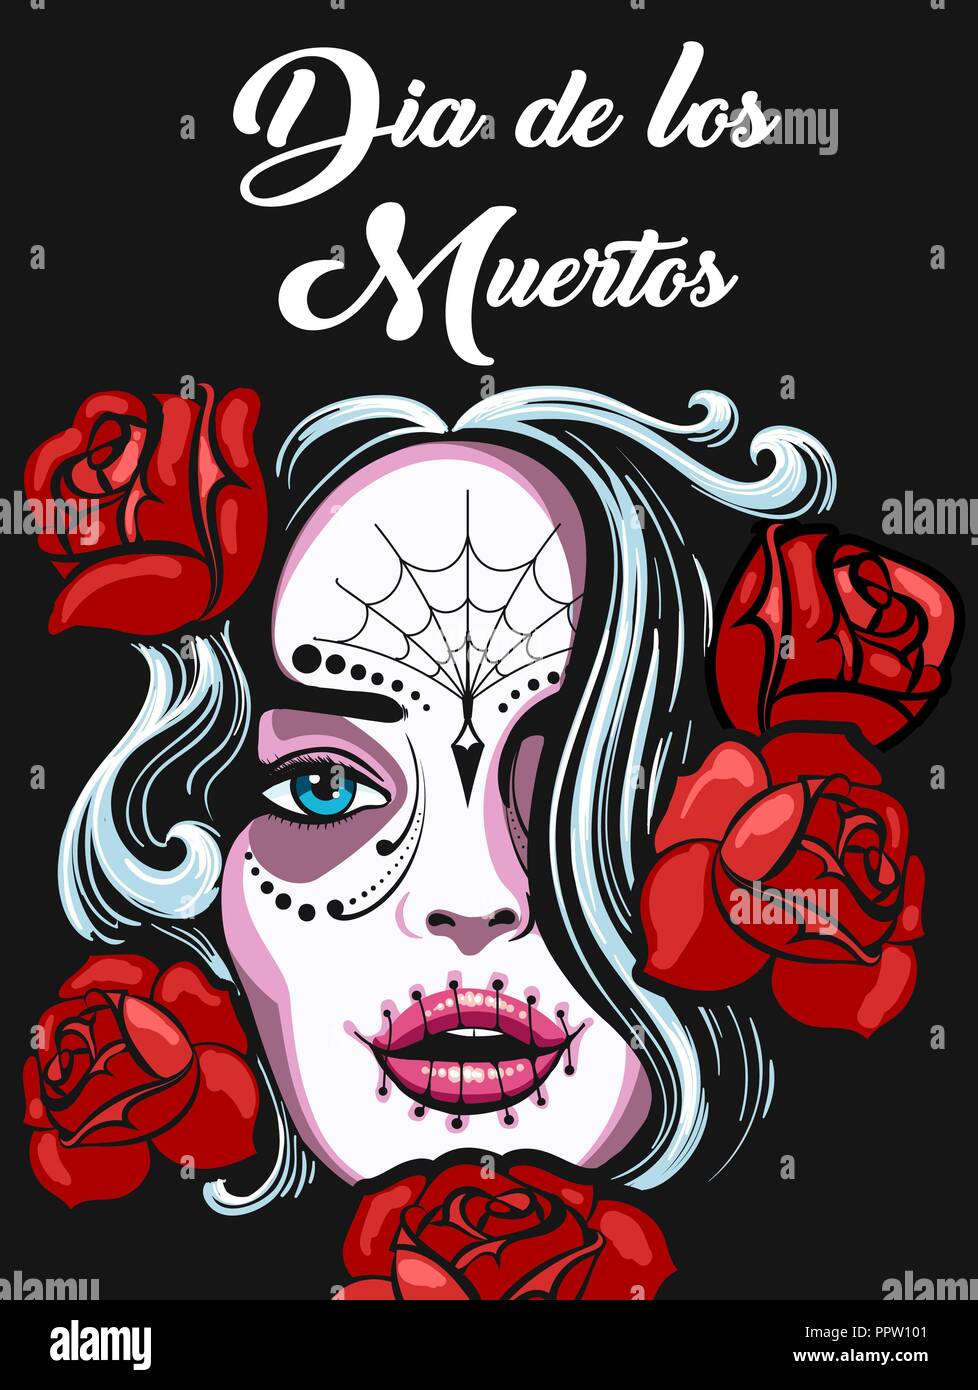 Female face with dead skull make, rose flowers and spanish wording Dia de los Muertos what means Day of the Dead. Mexican Holiday poster design. Vecto Stock Vector